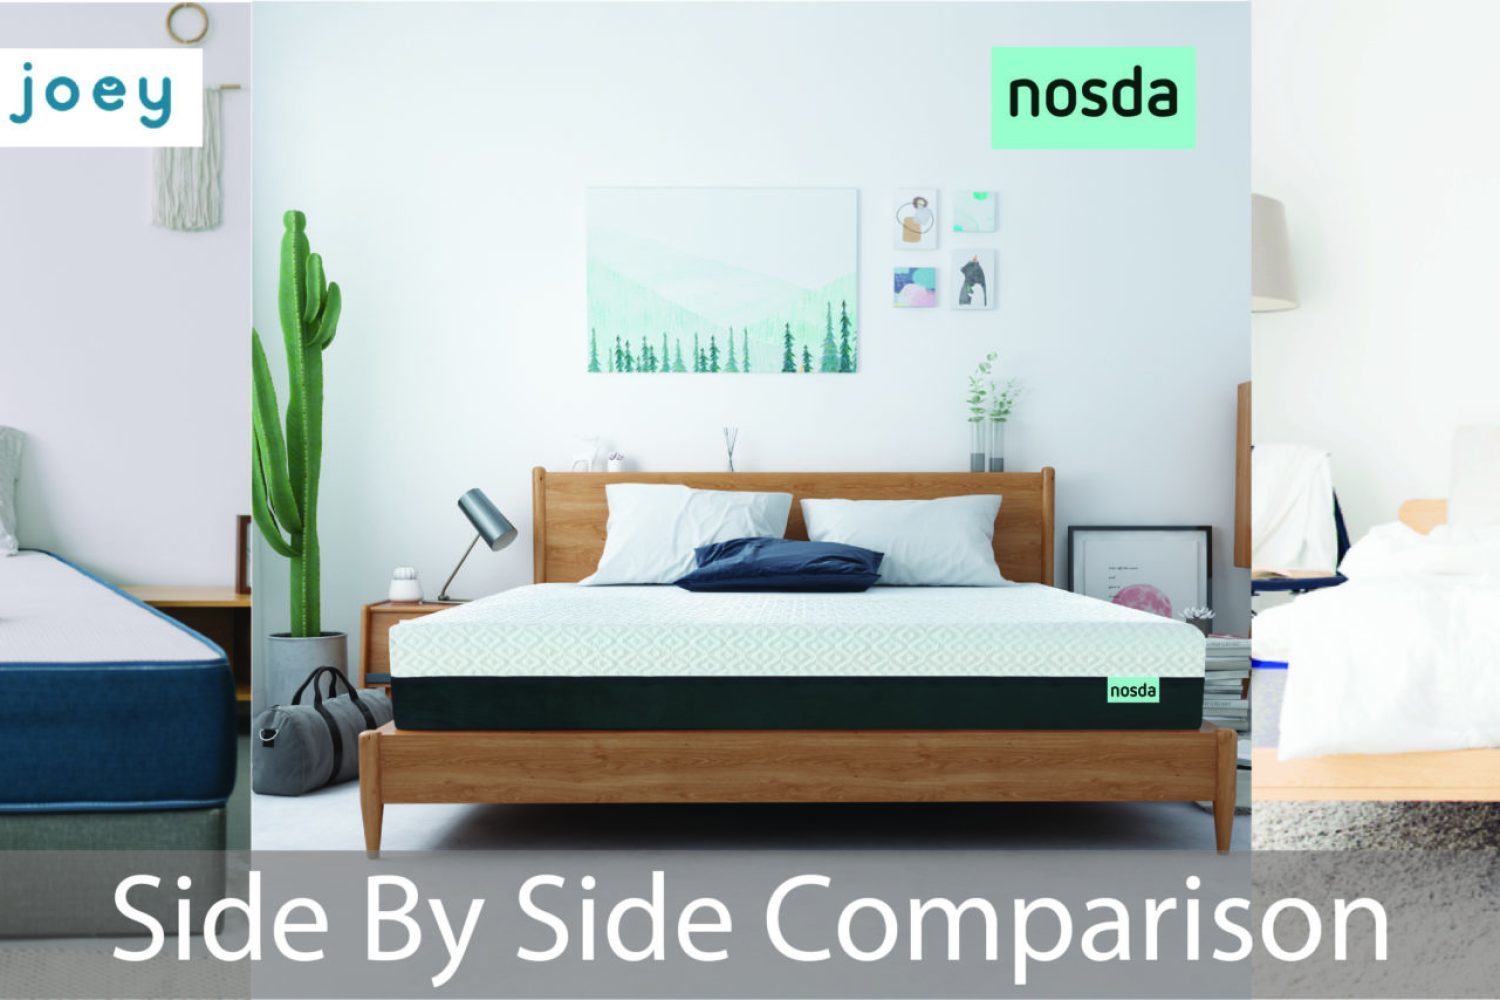 joey and sonno mattress comparison side by side